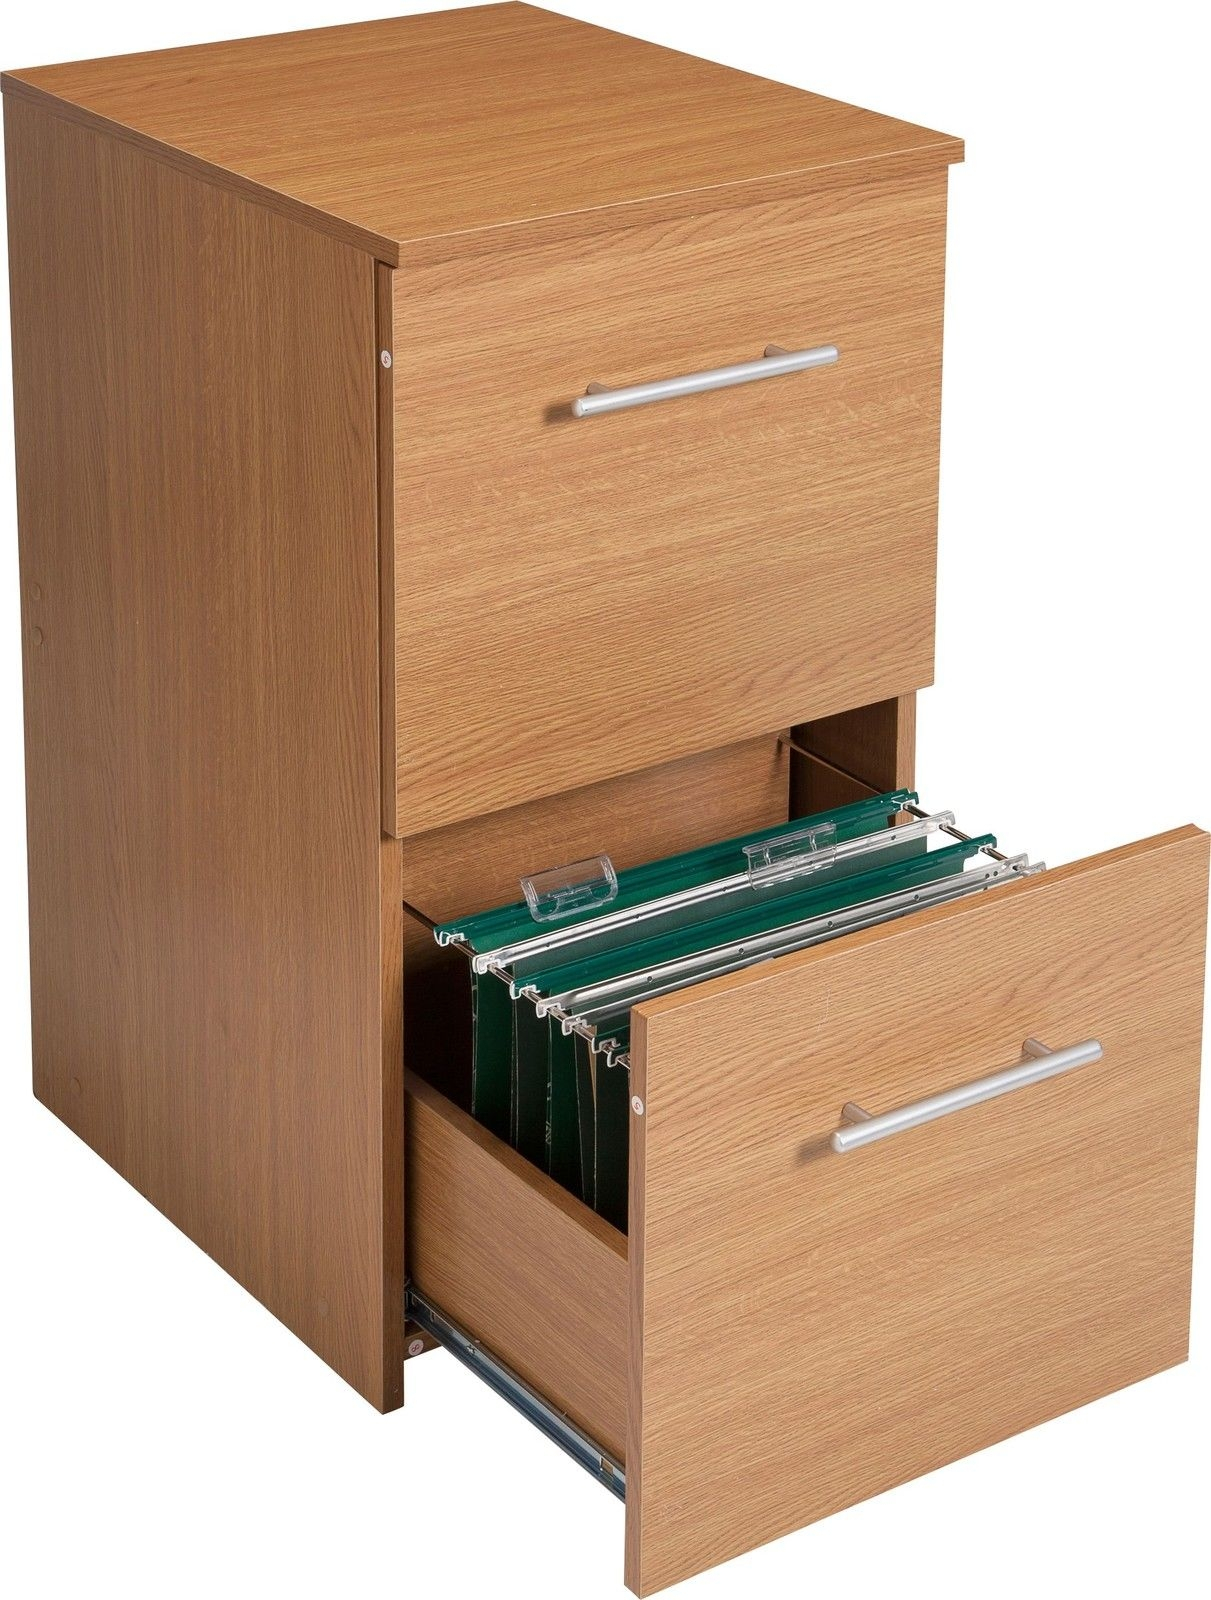 2 Drawer Filing Cabinet Oak Effect Home Office Study Orange Filing intended for dimensions 1211 X 1600